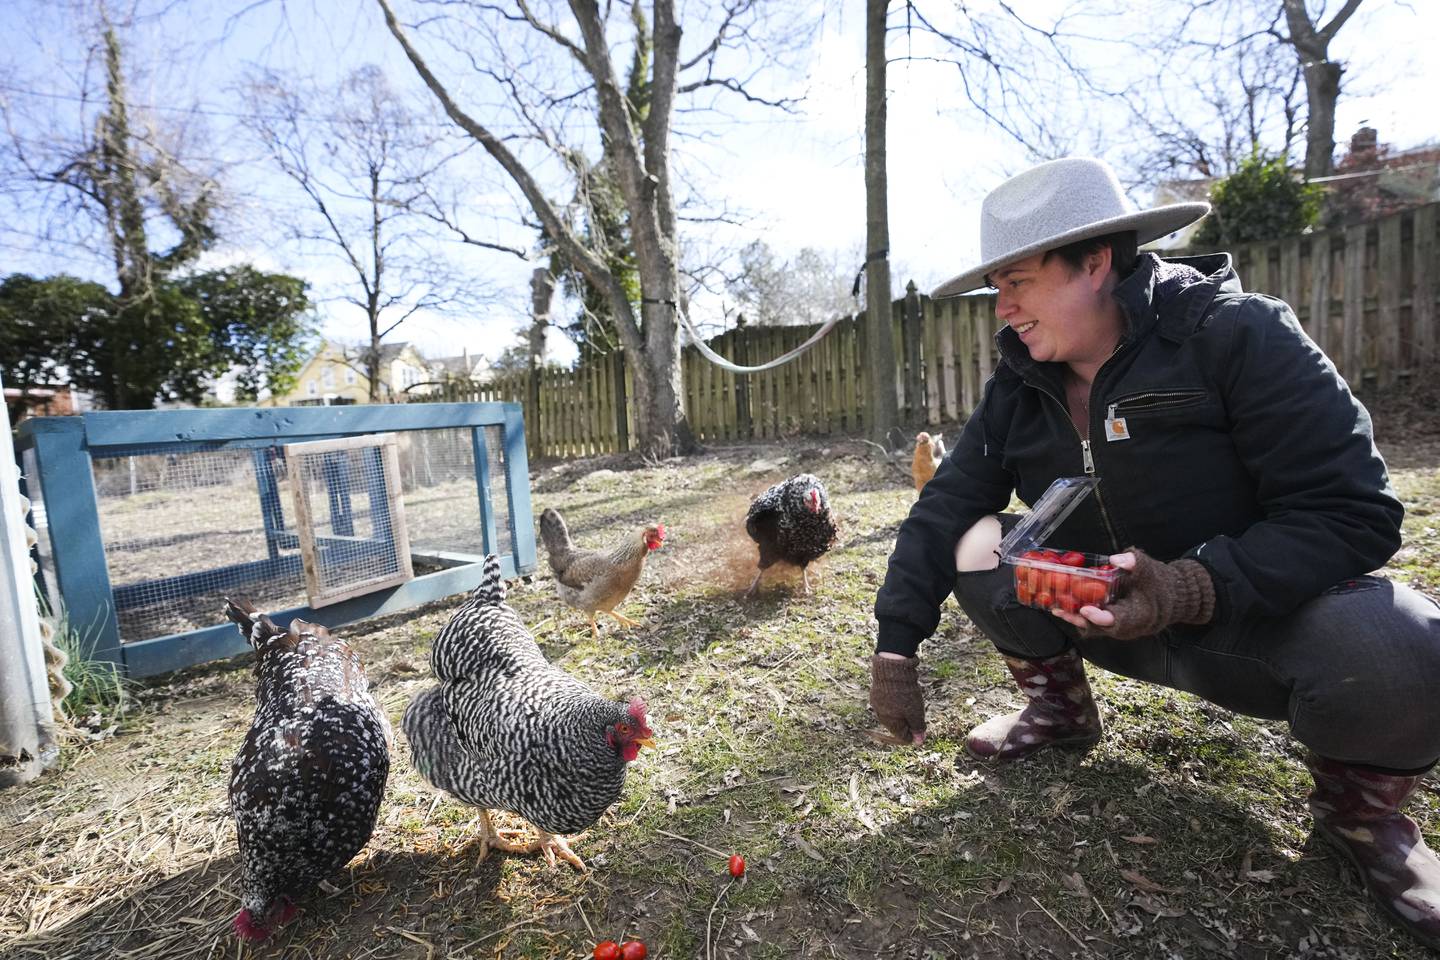 Christa Daring, along with their partner Dan Staples and child Juniper, raise chickens in their backyard in Lauraville on February 3, 2023. They have ten chickens total.